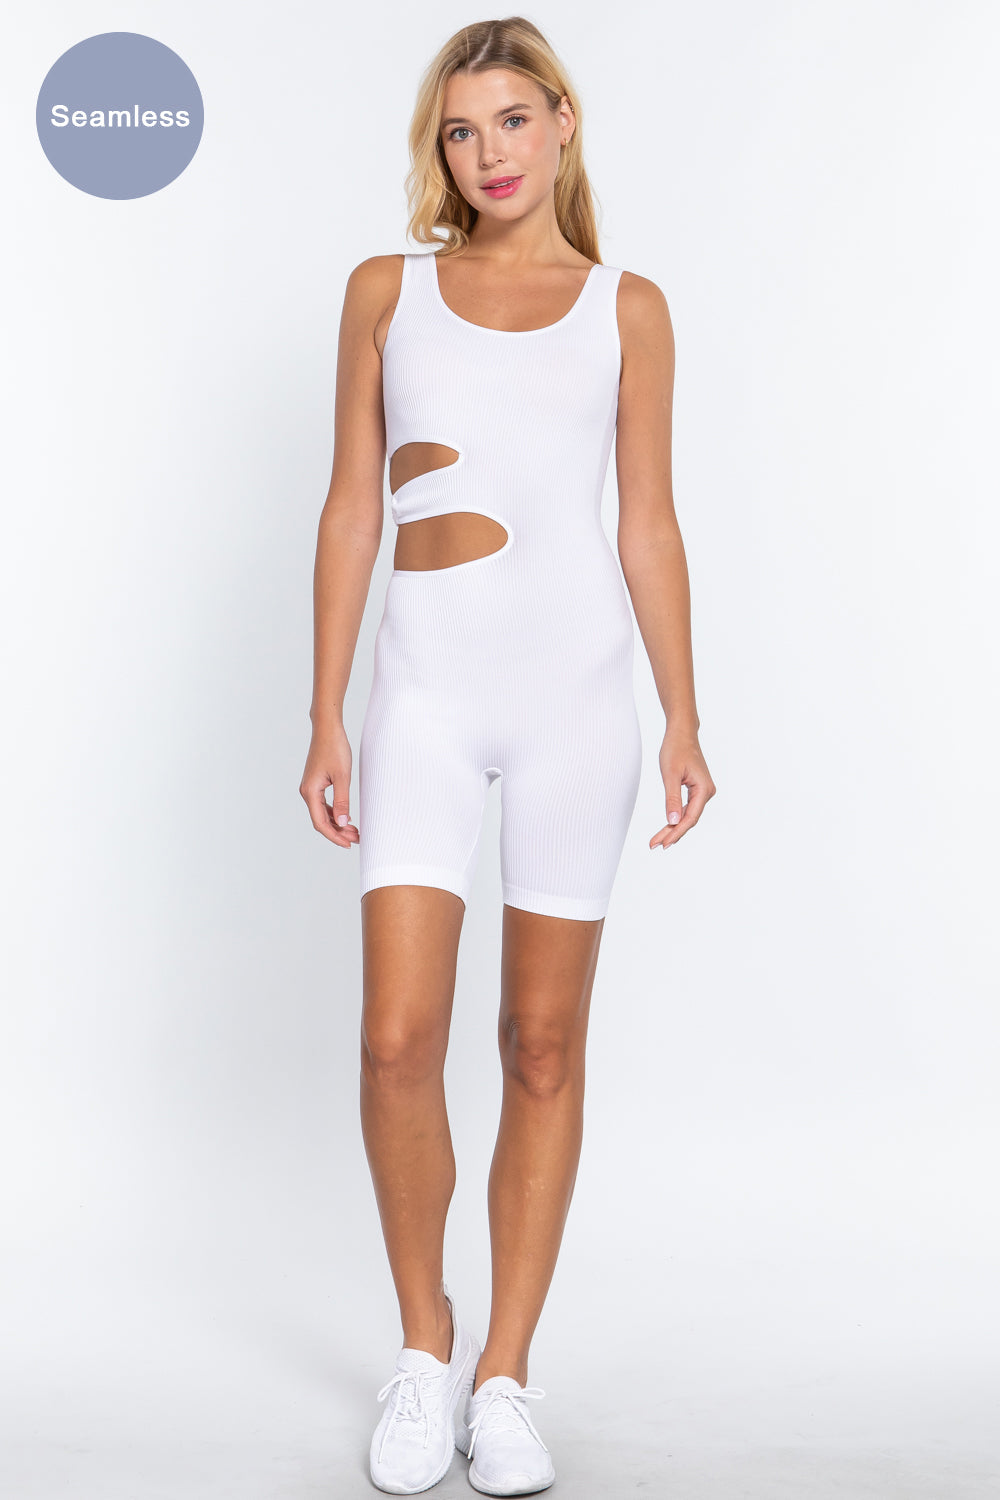 Suave Cut-out Seamless Romper Smile Sparker